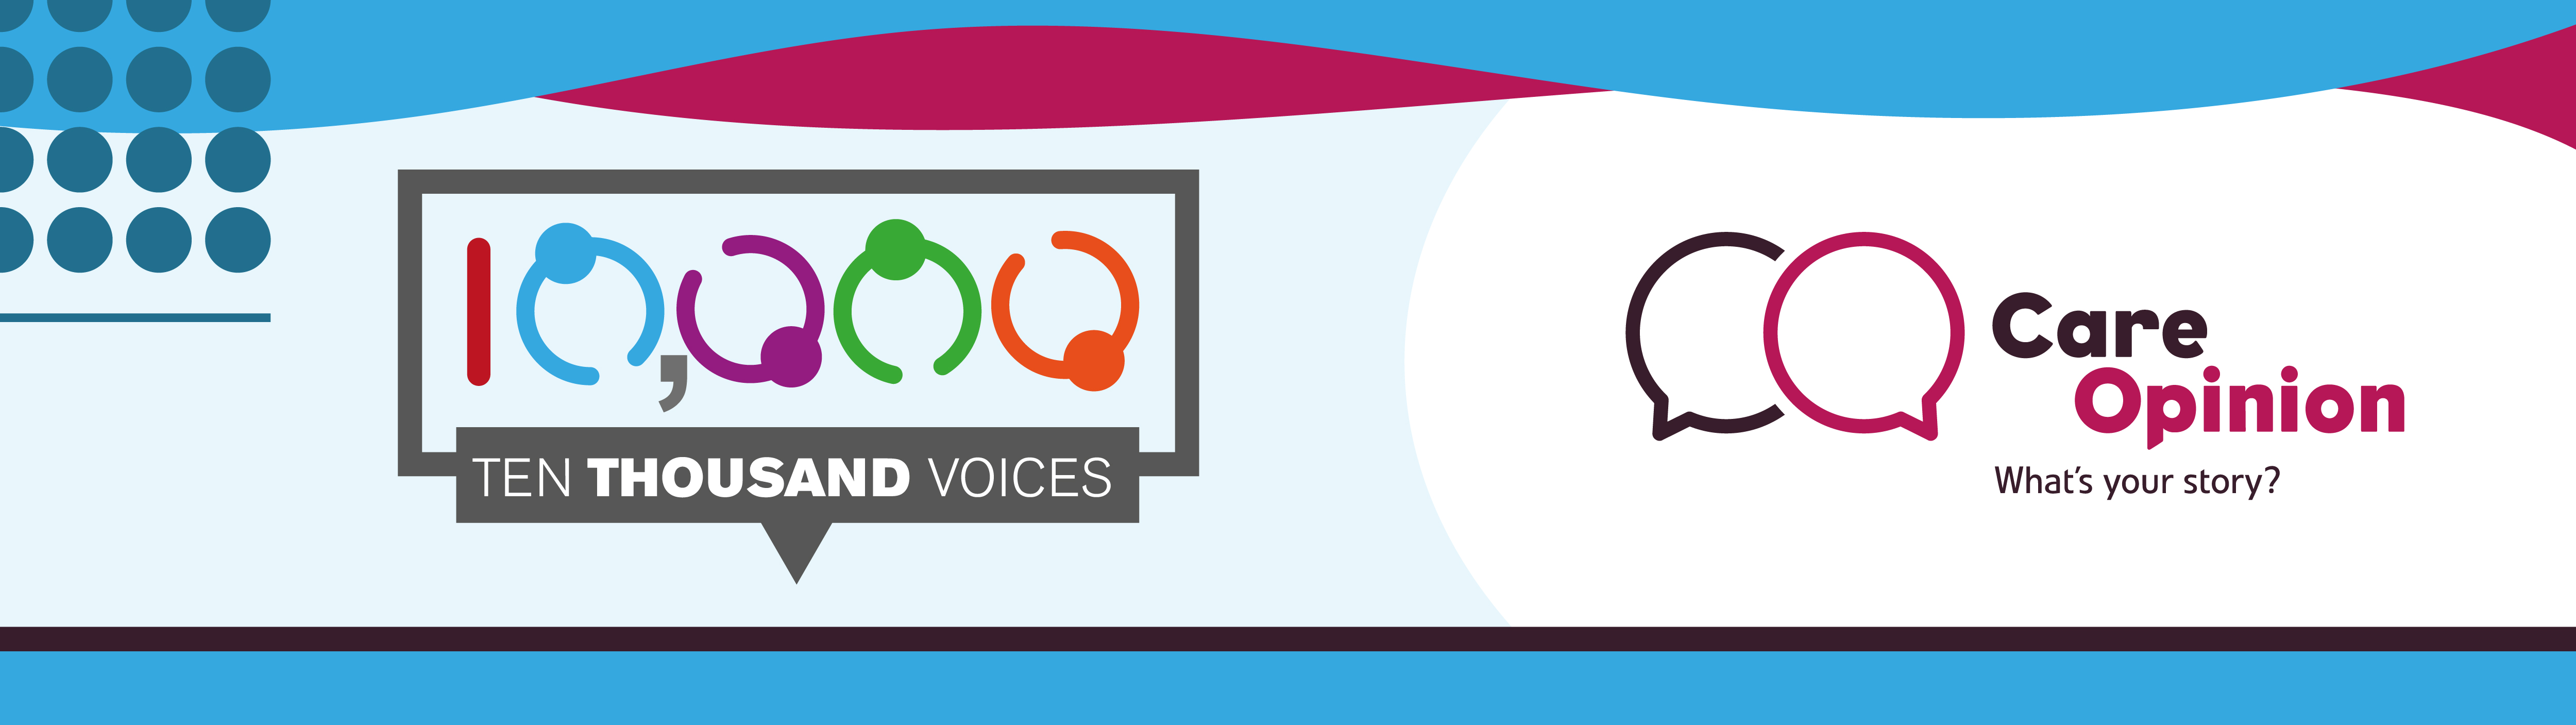 Care Opinion and 10,000 More Voices logo banner